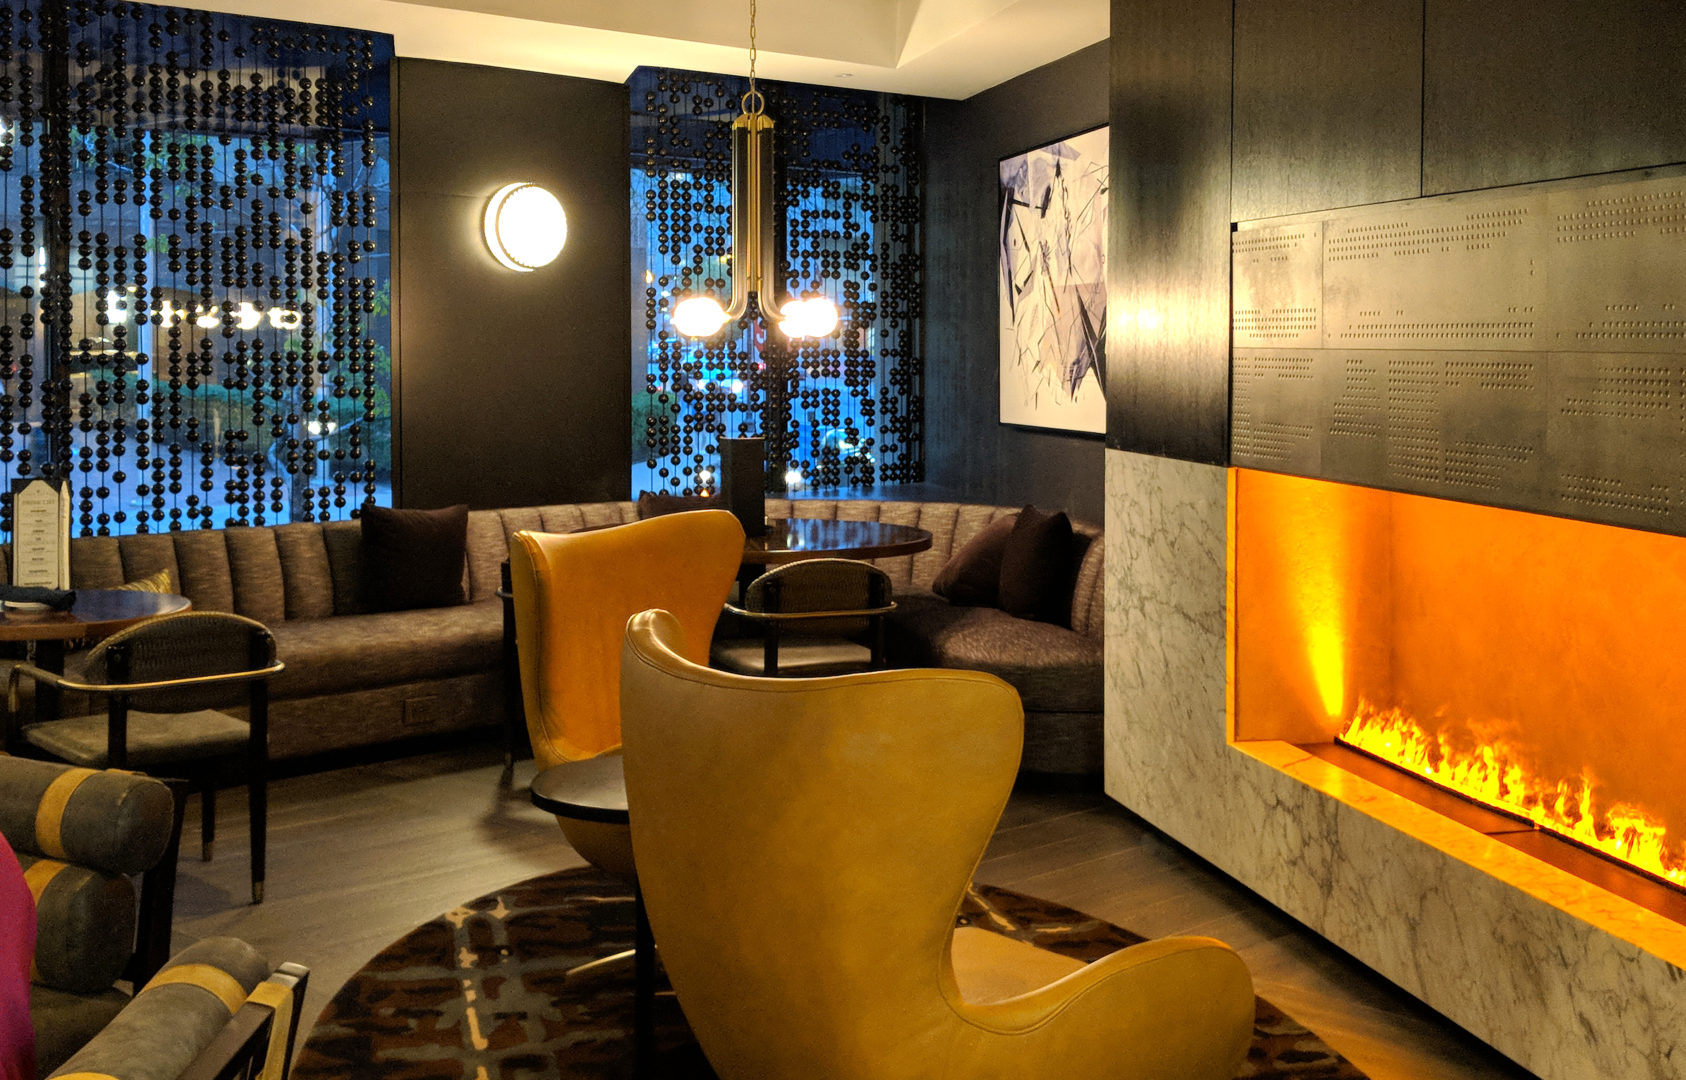 Fireplace in Lounge area of Back Bay Hilton